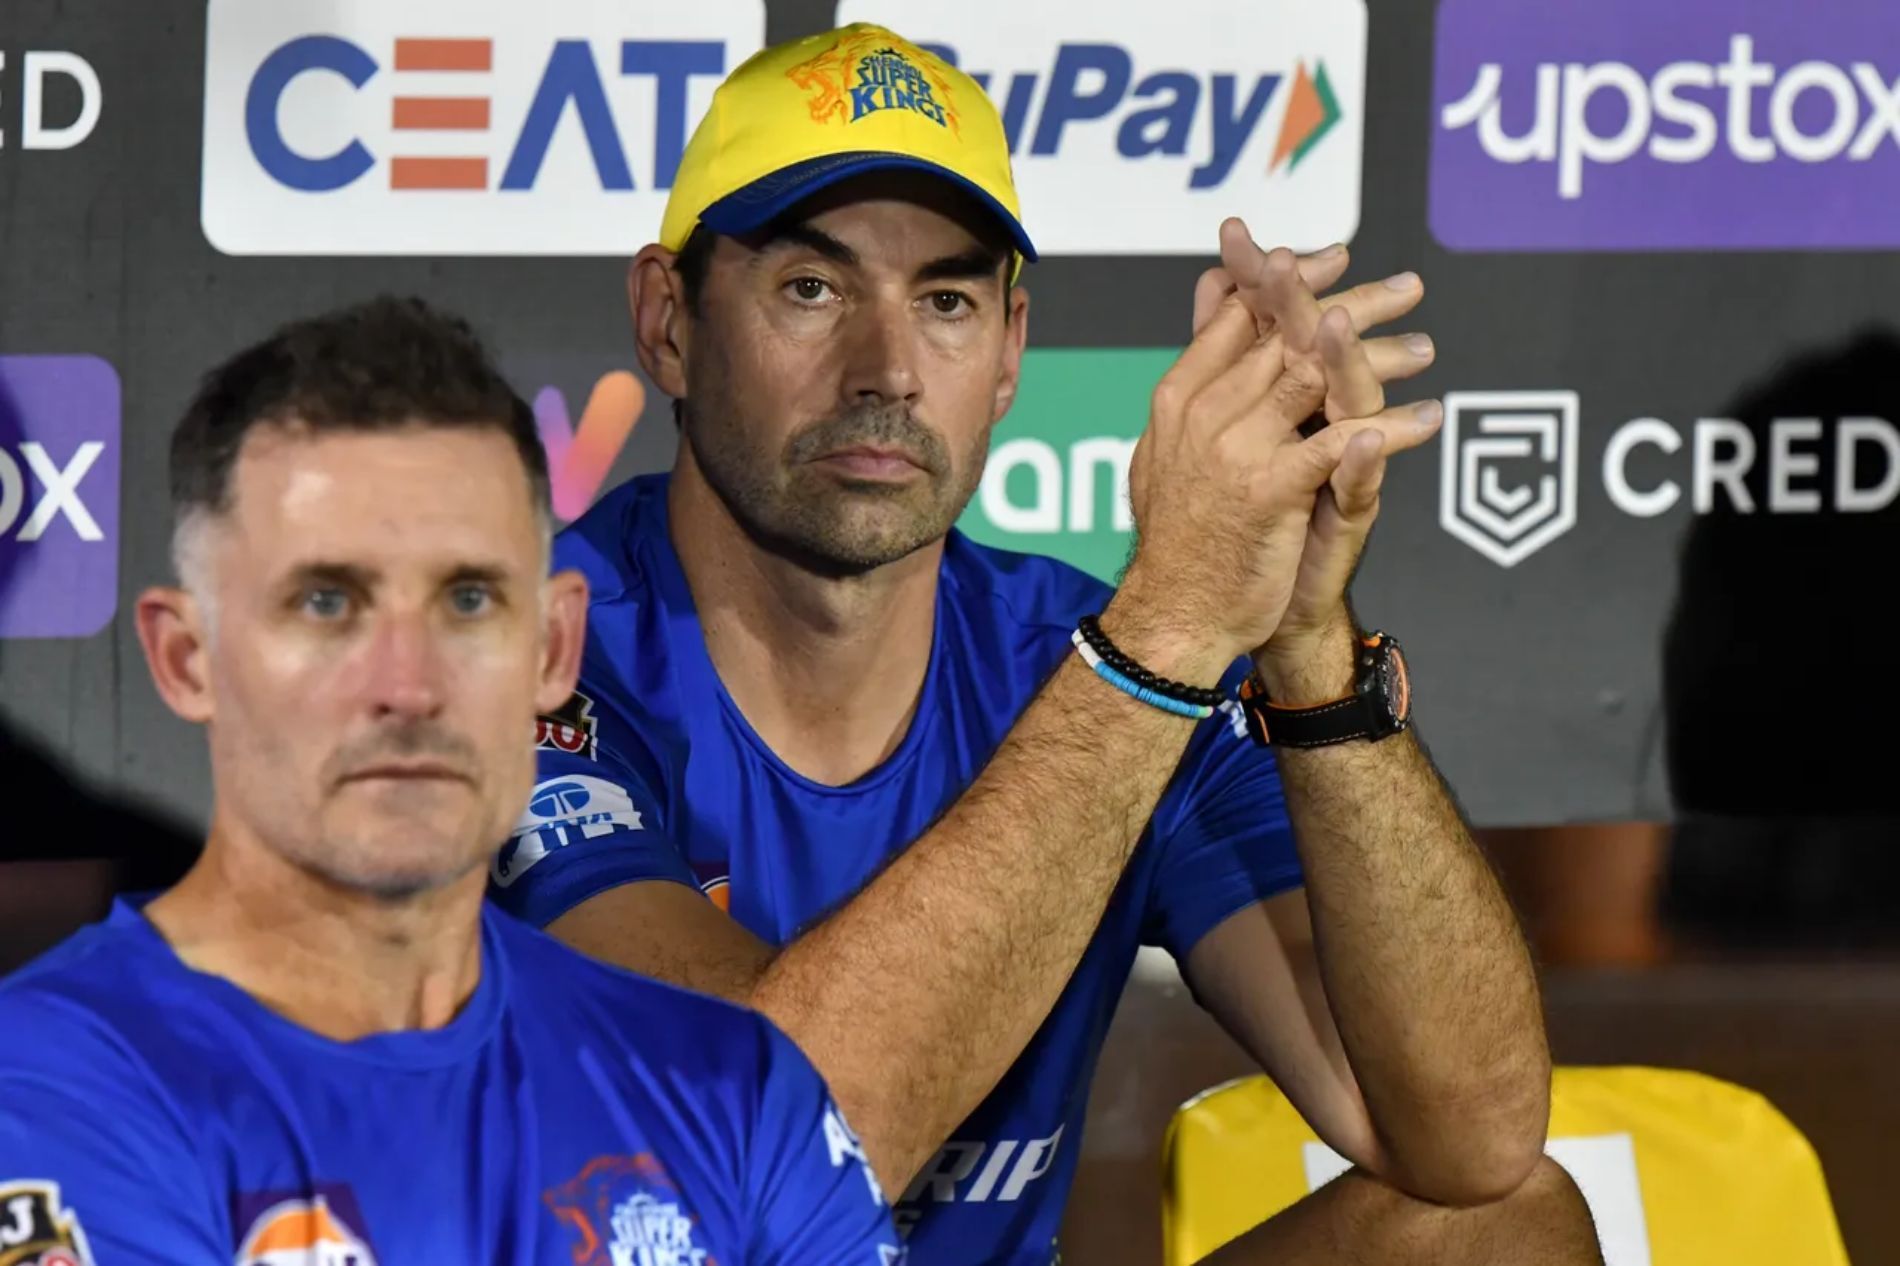 Stephen Fleming and Mike Hussey&rsquo;s stoic expressions perfectly capture Chennai&rsquo;s woes in the early games of IPL 2022. They would hope things change now that CSK have broken their four-game losing streak.